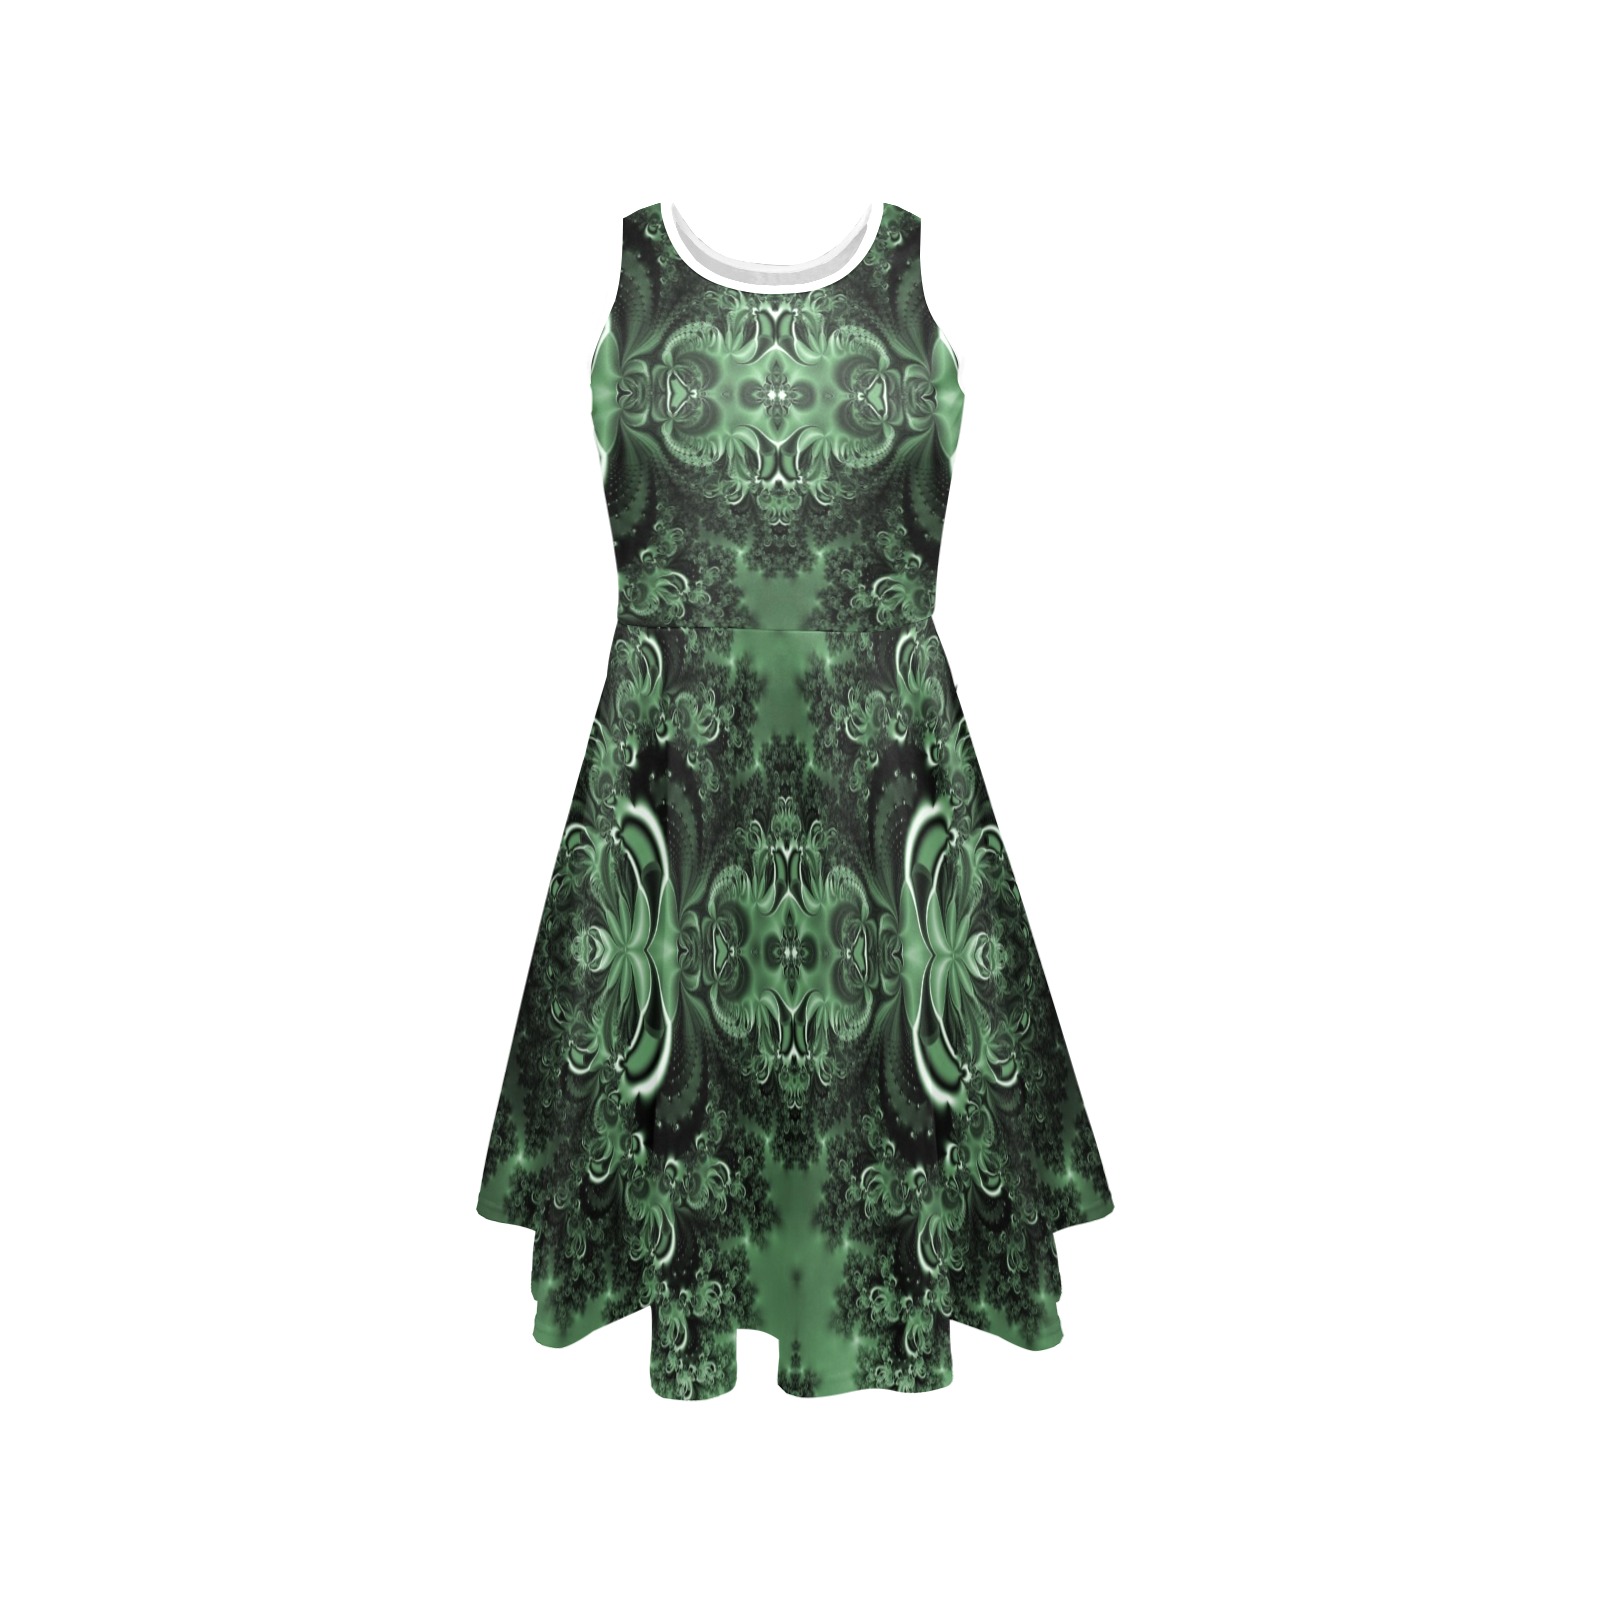 Deep in the Forest Frost Fractal Sleeveless Expansion Dress (Model D60)